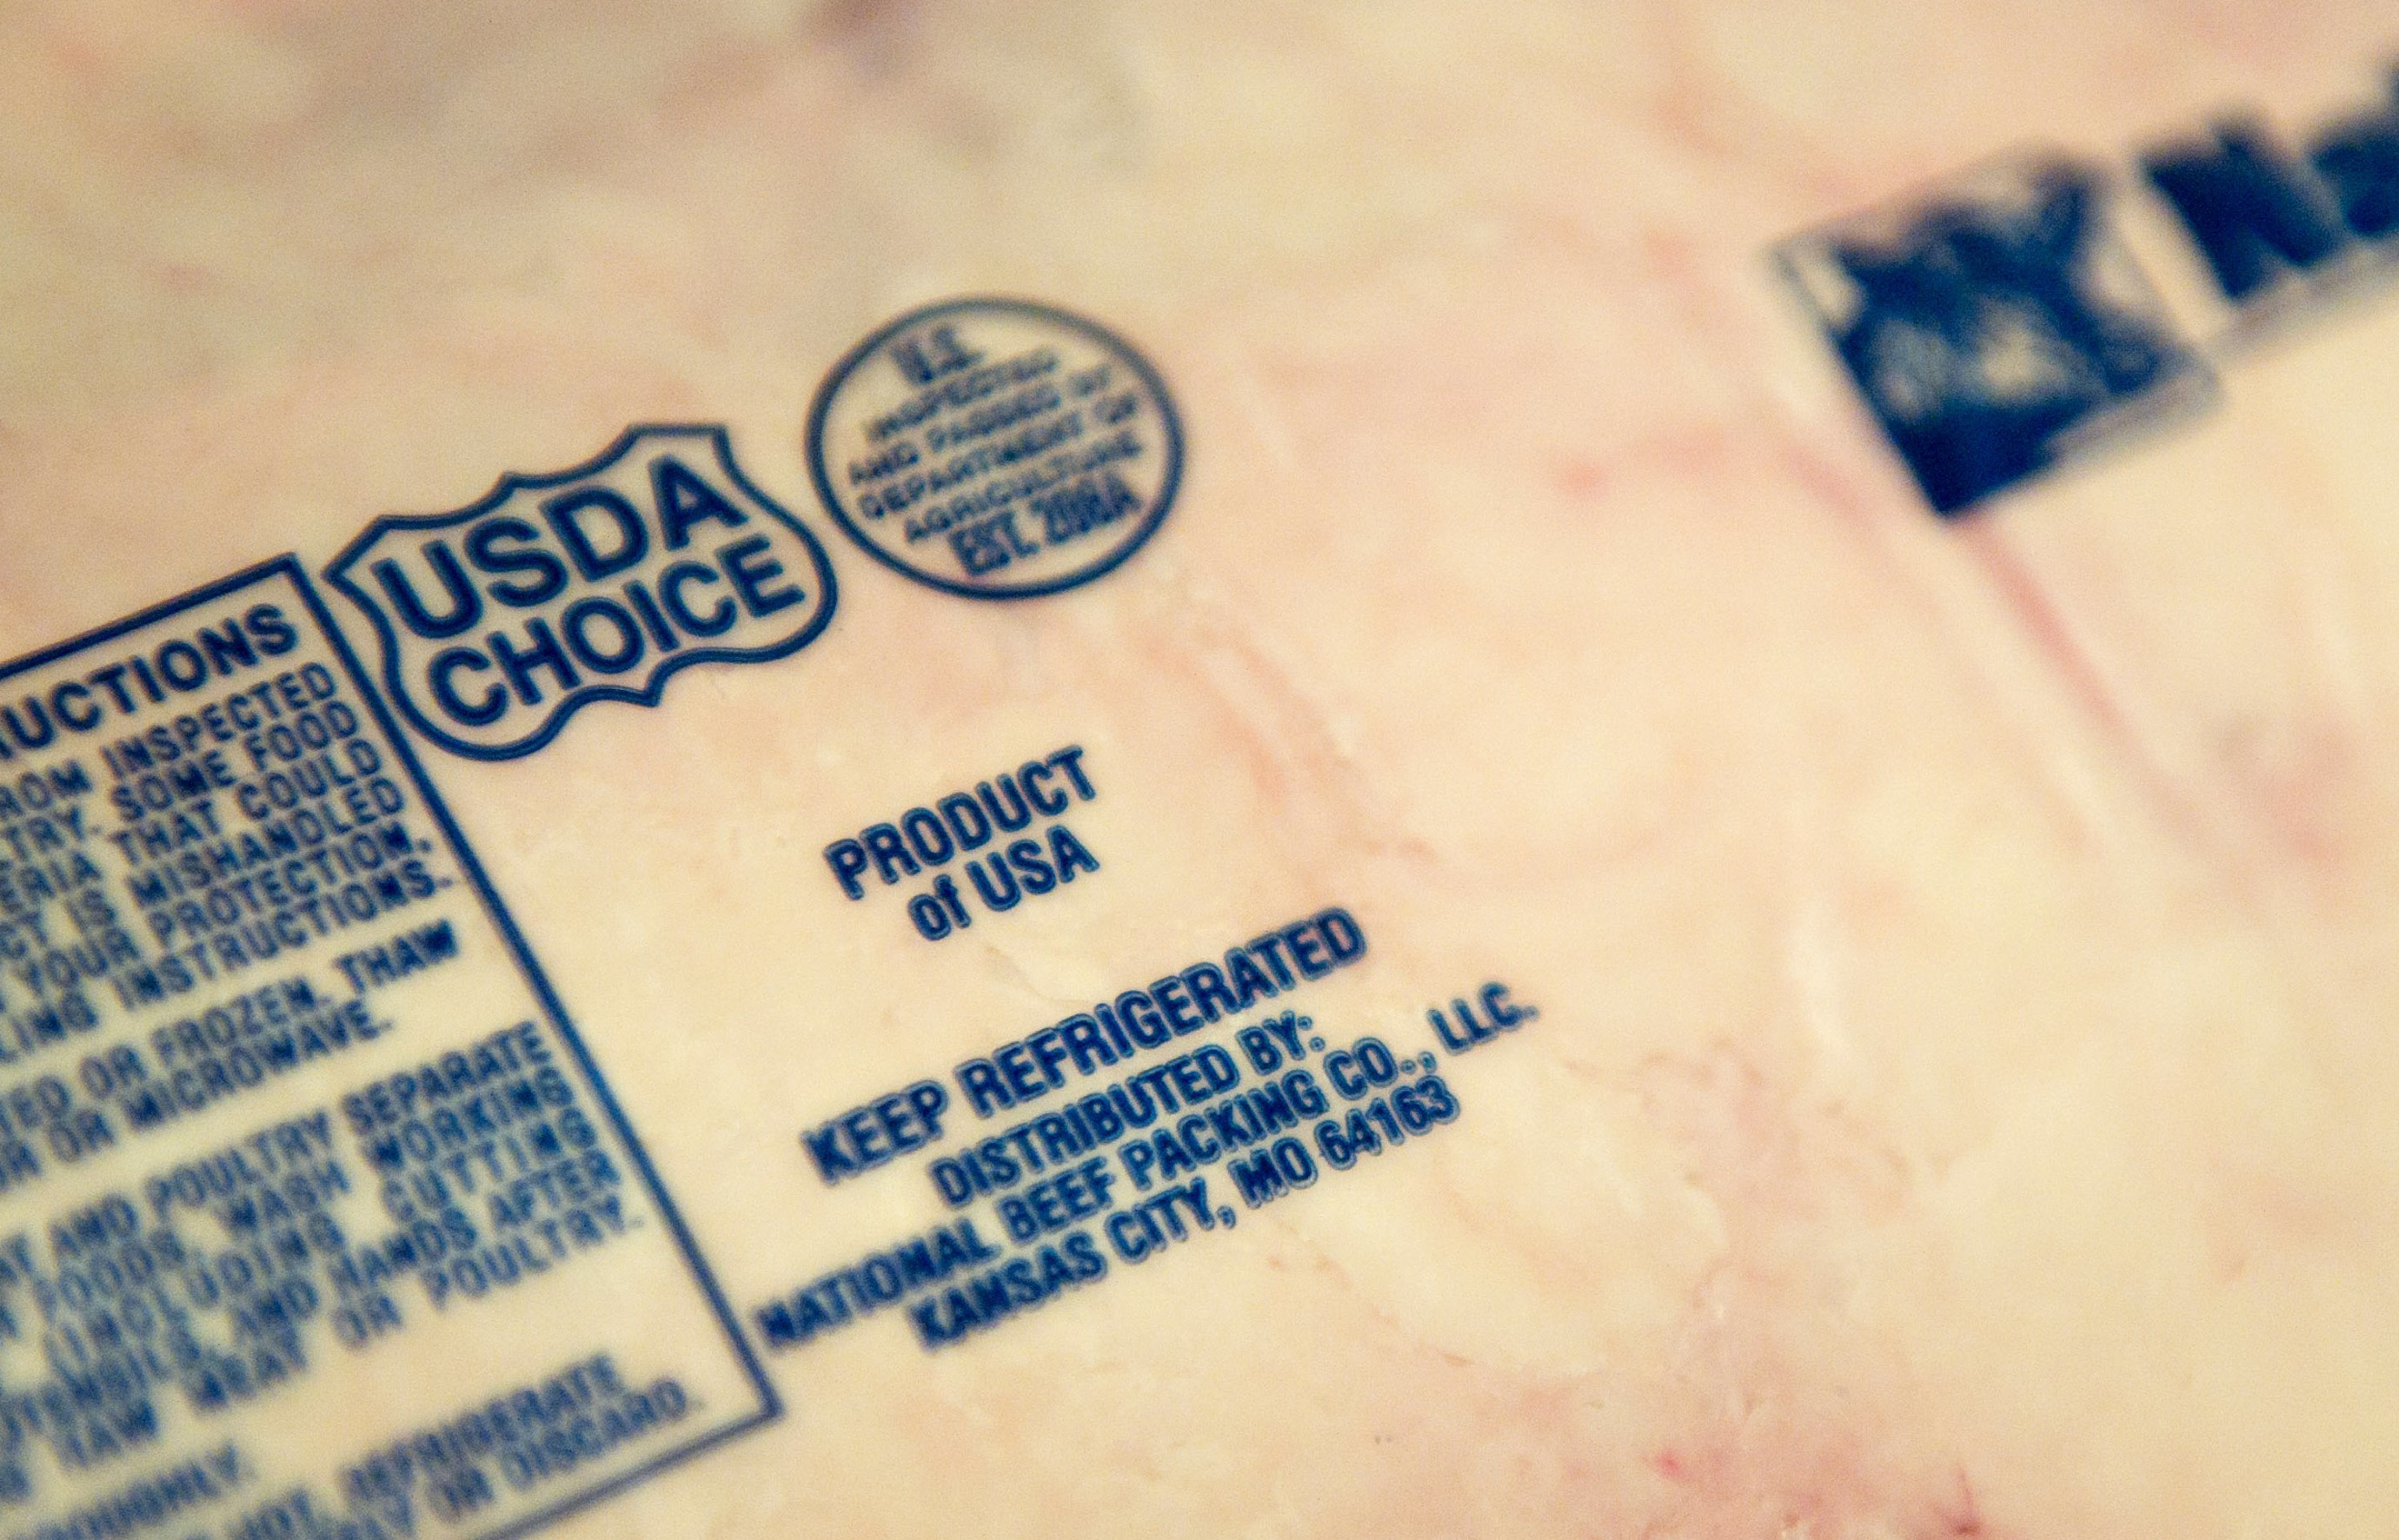 Do you care if your meat came from the United States? USDA wants